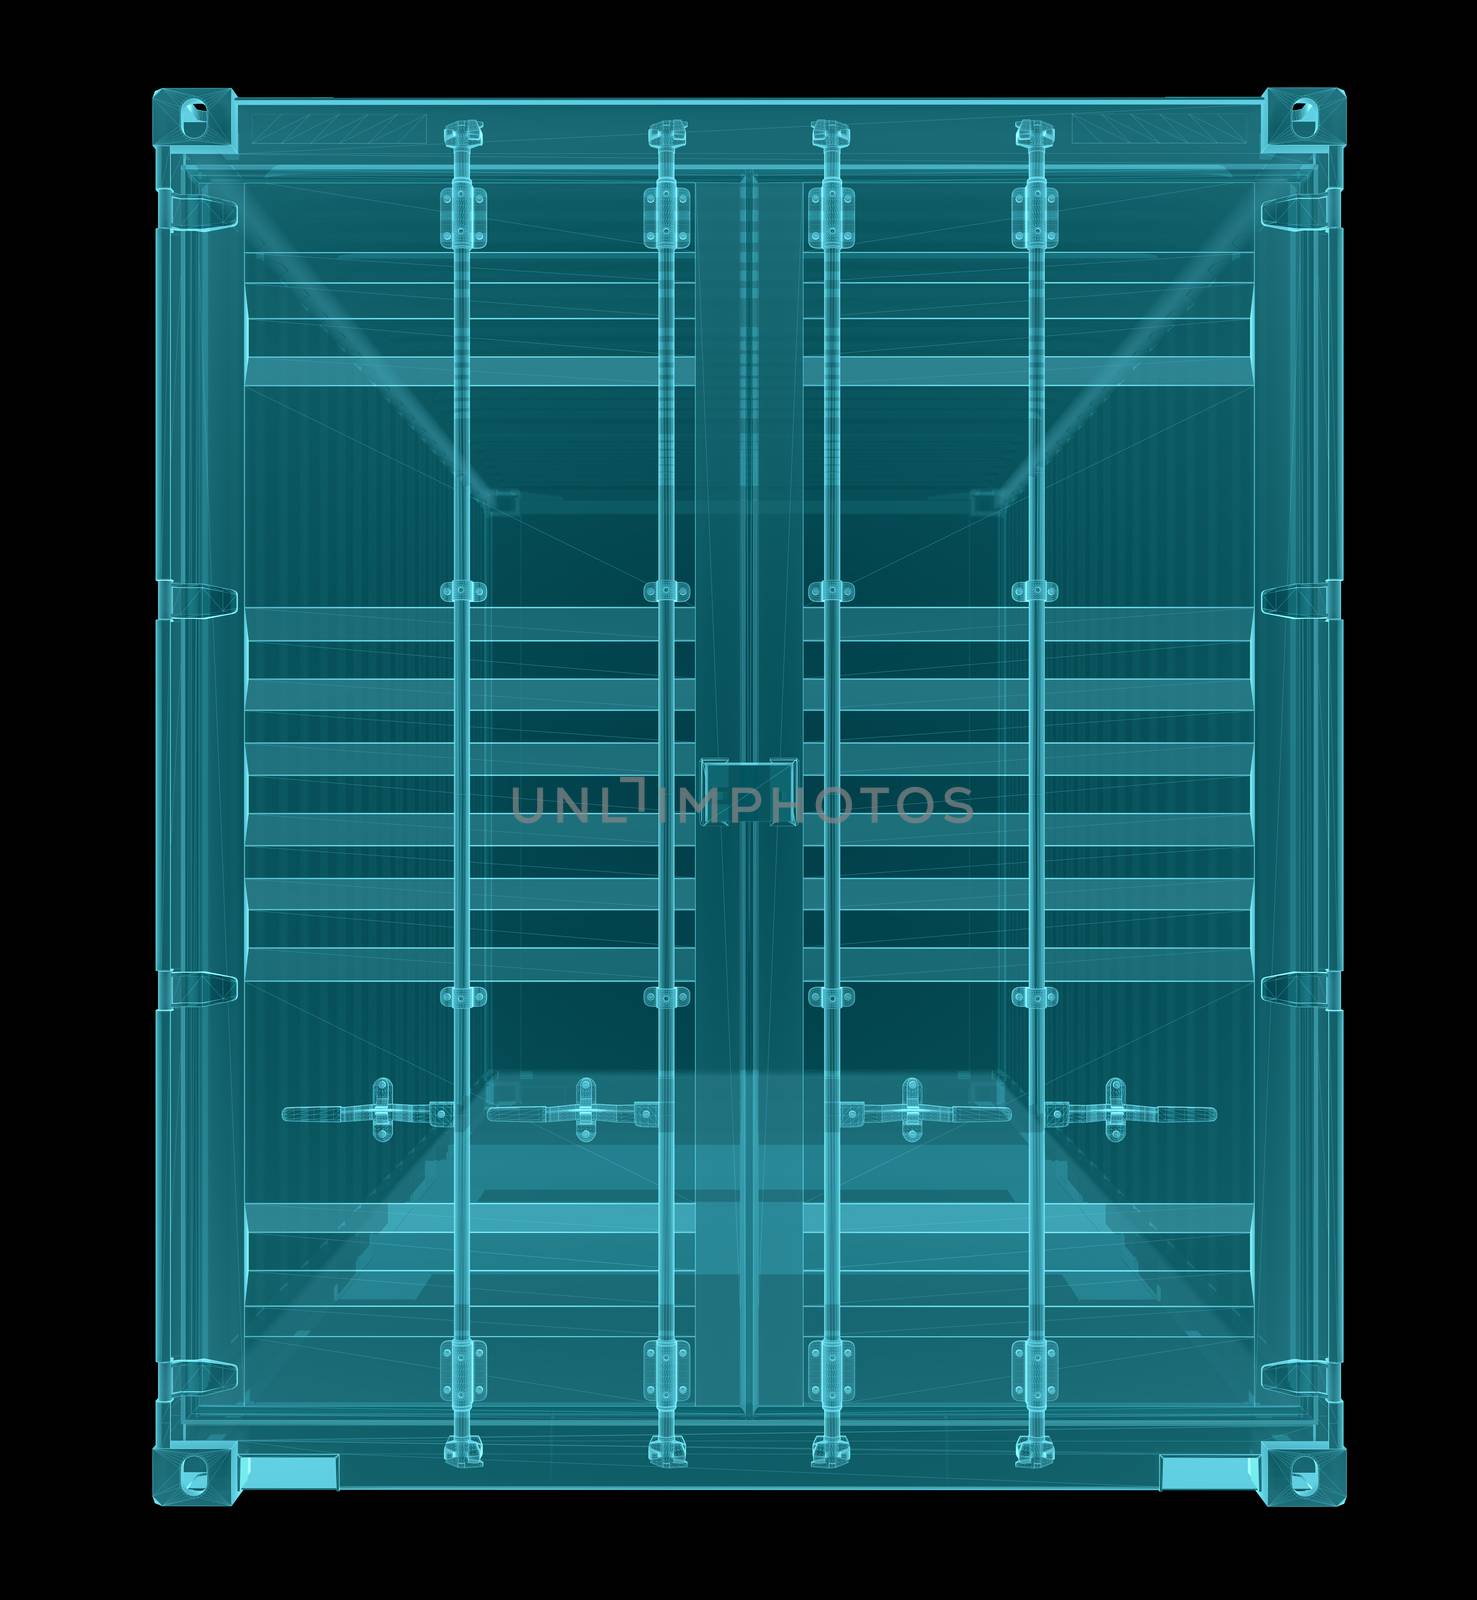 Shipping container. X-ray image by cherezoff